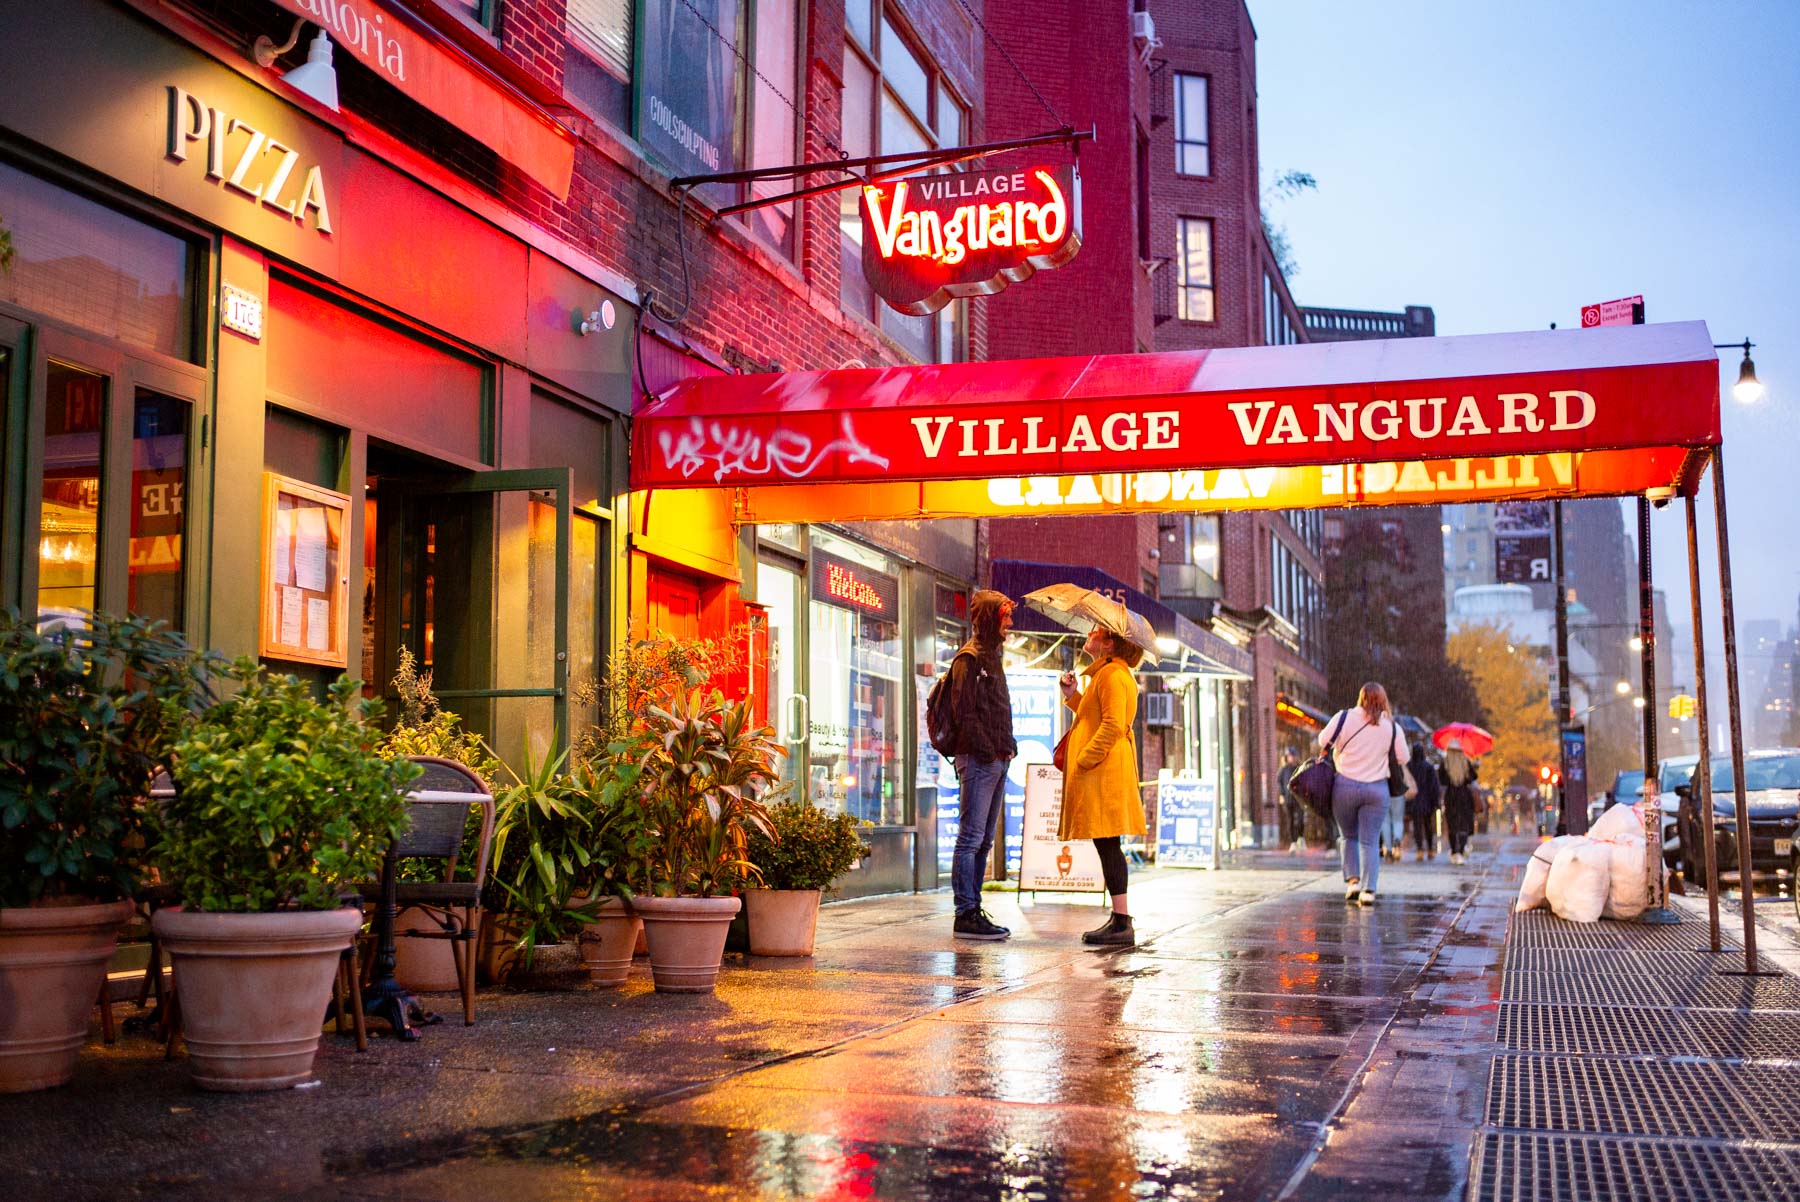 Village Vanguard New York City, best things to do in New York City at night